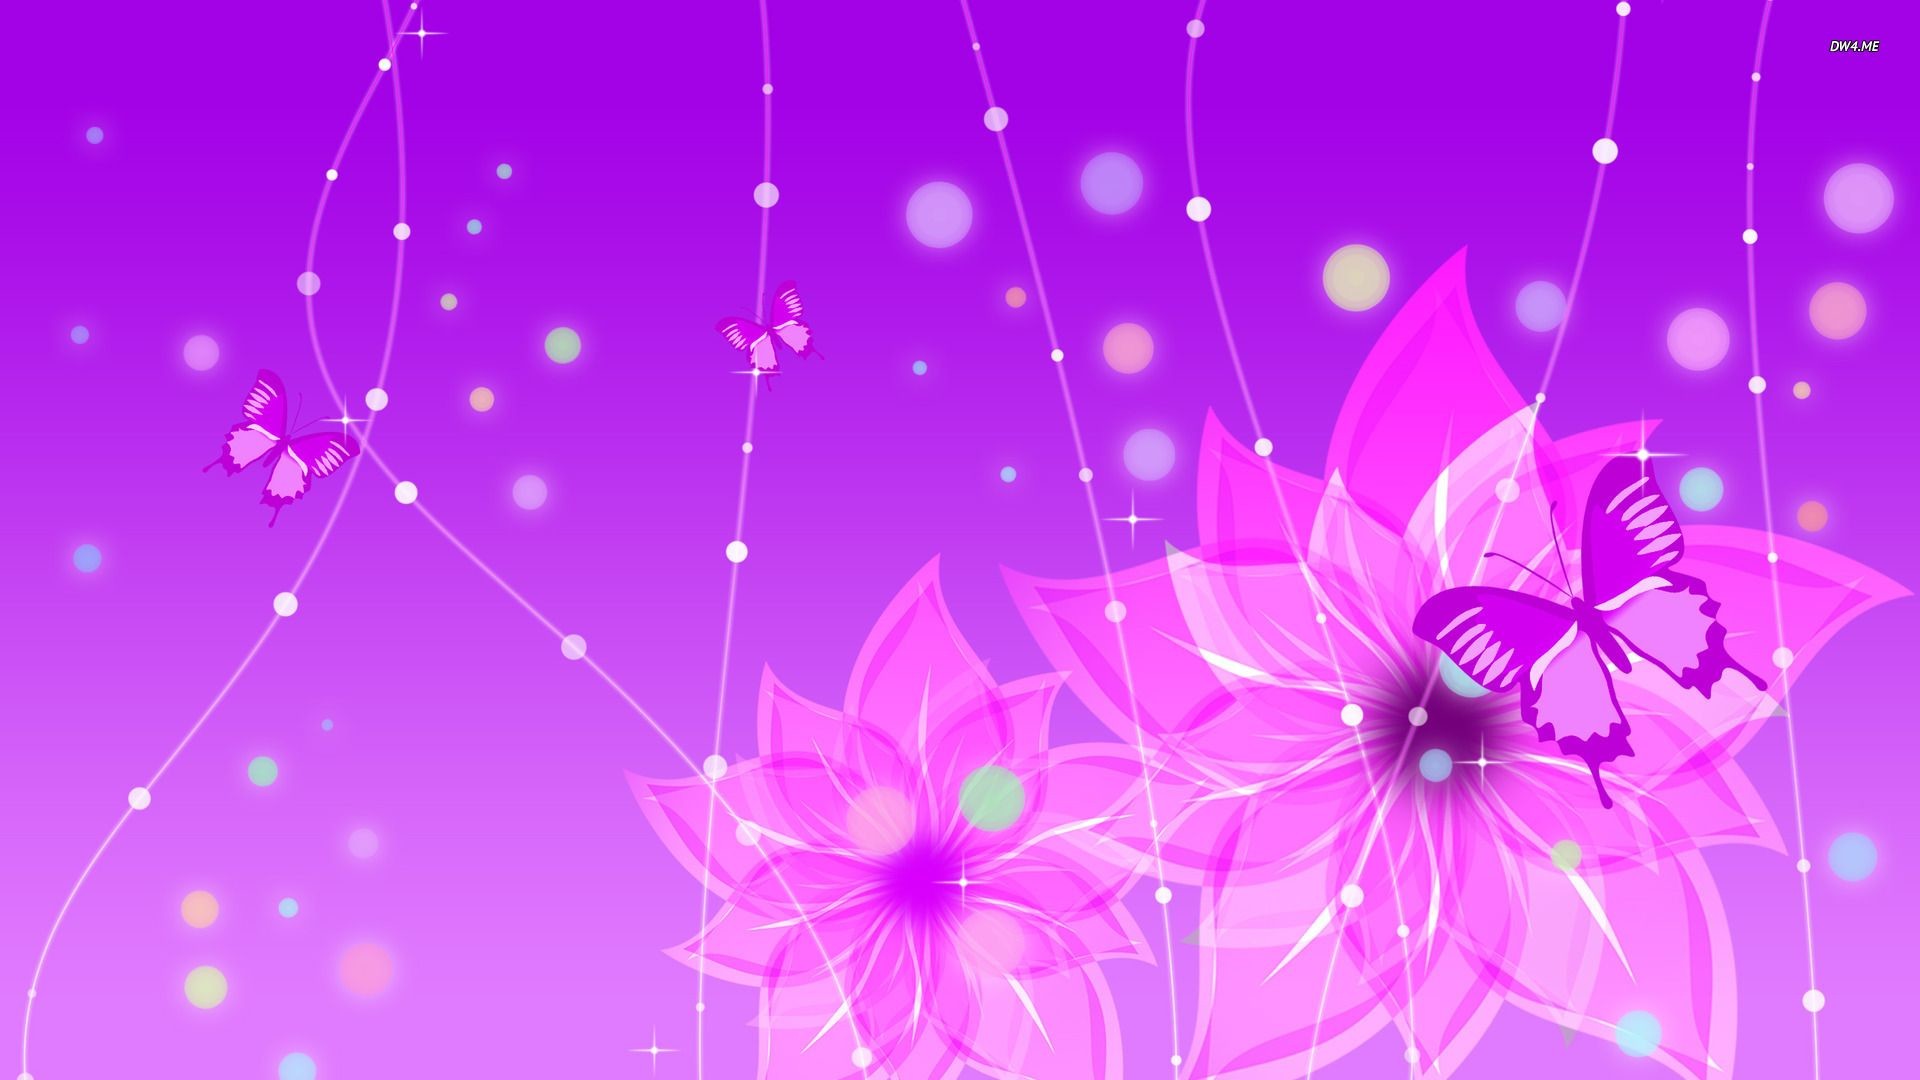 1920x1080 Purple Flower Backgrounds | Purple flowers and butterfies wallpaper   Purple flowers and .